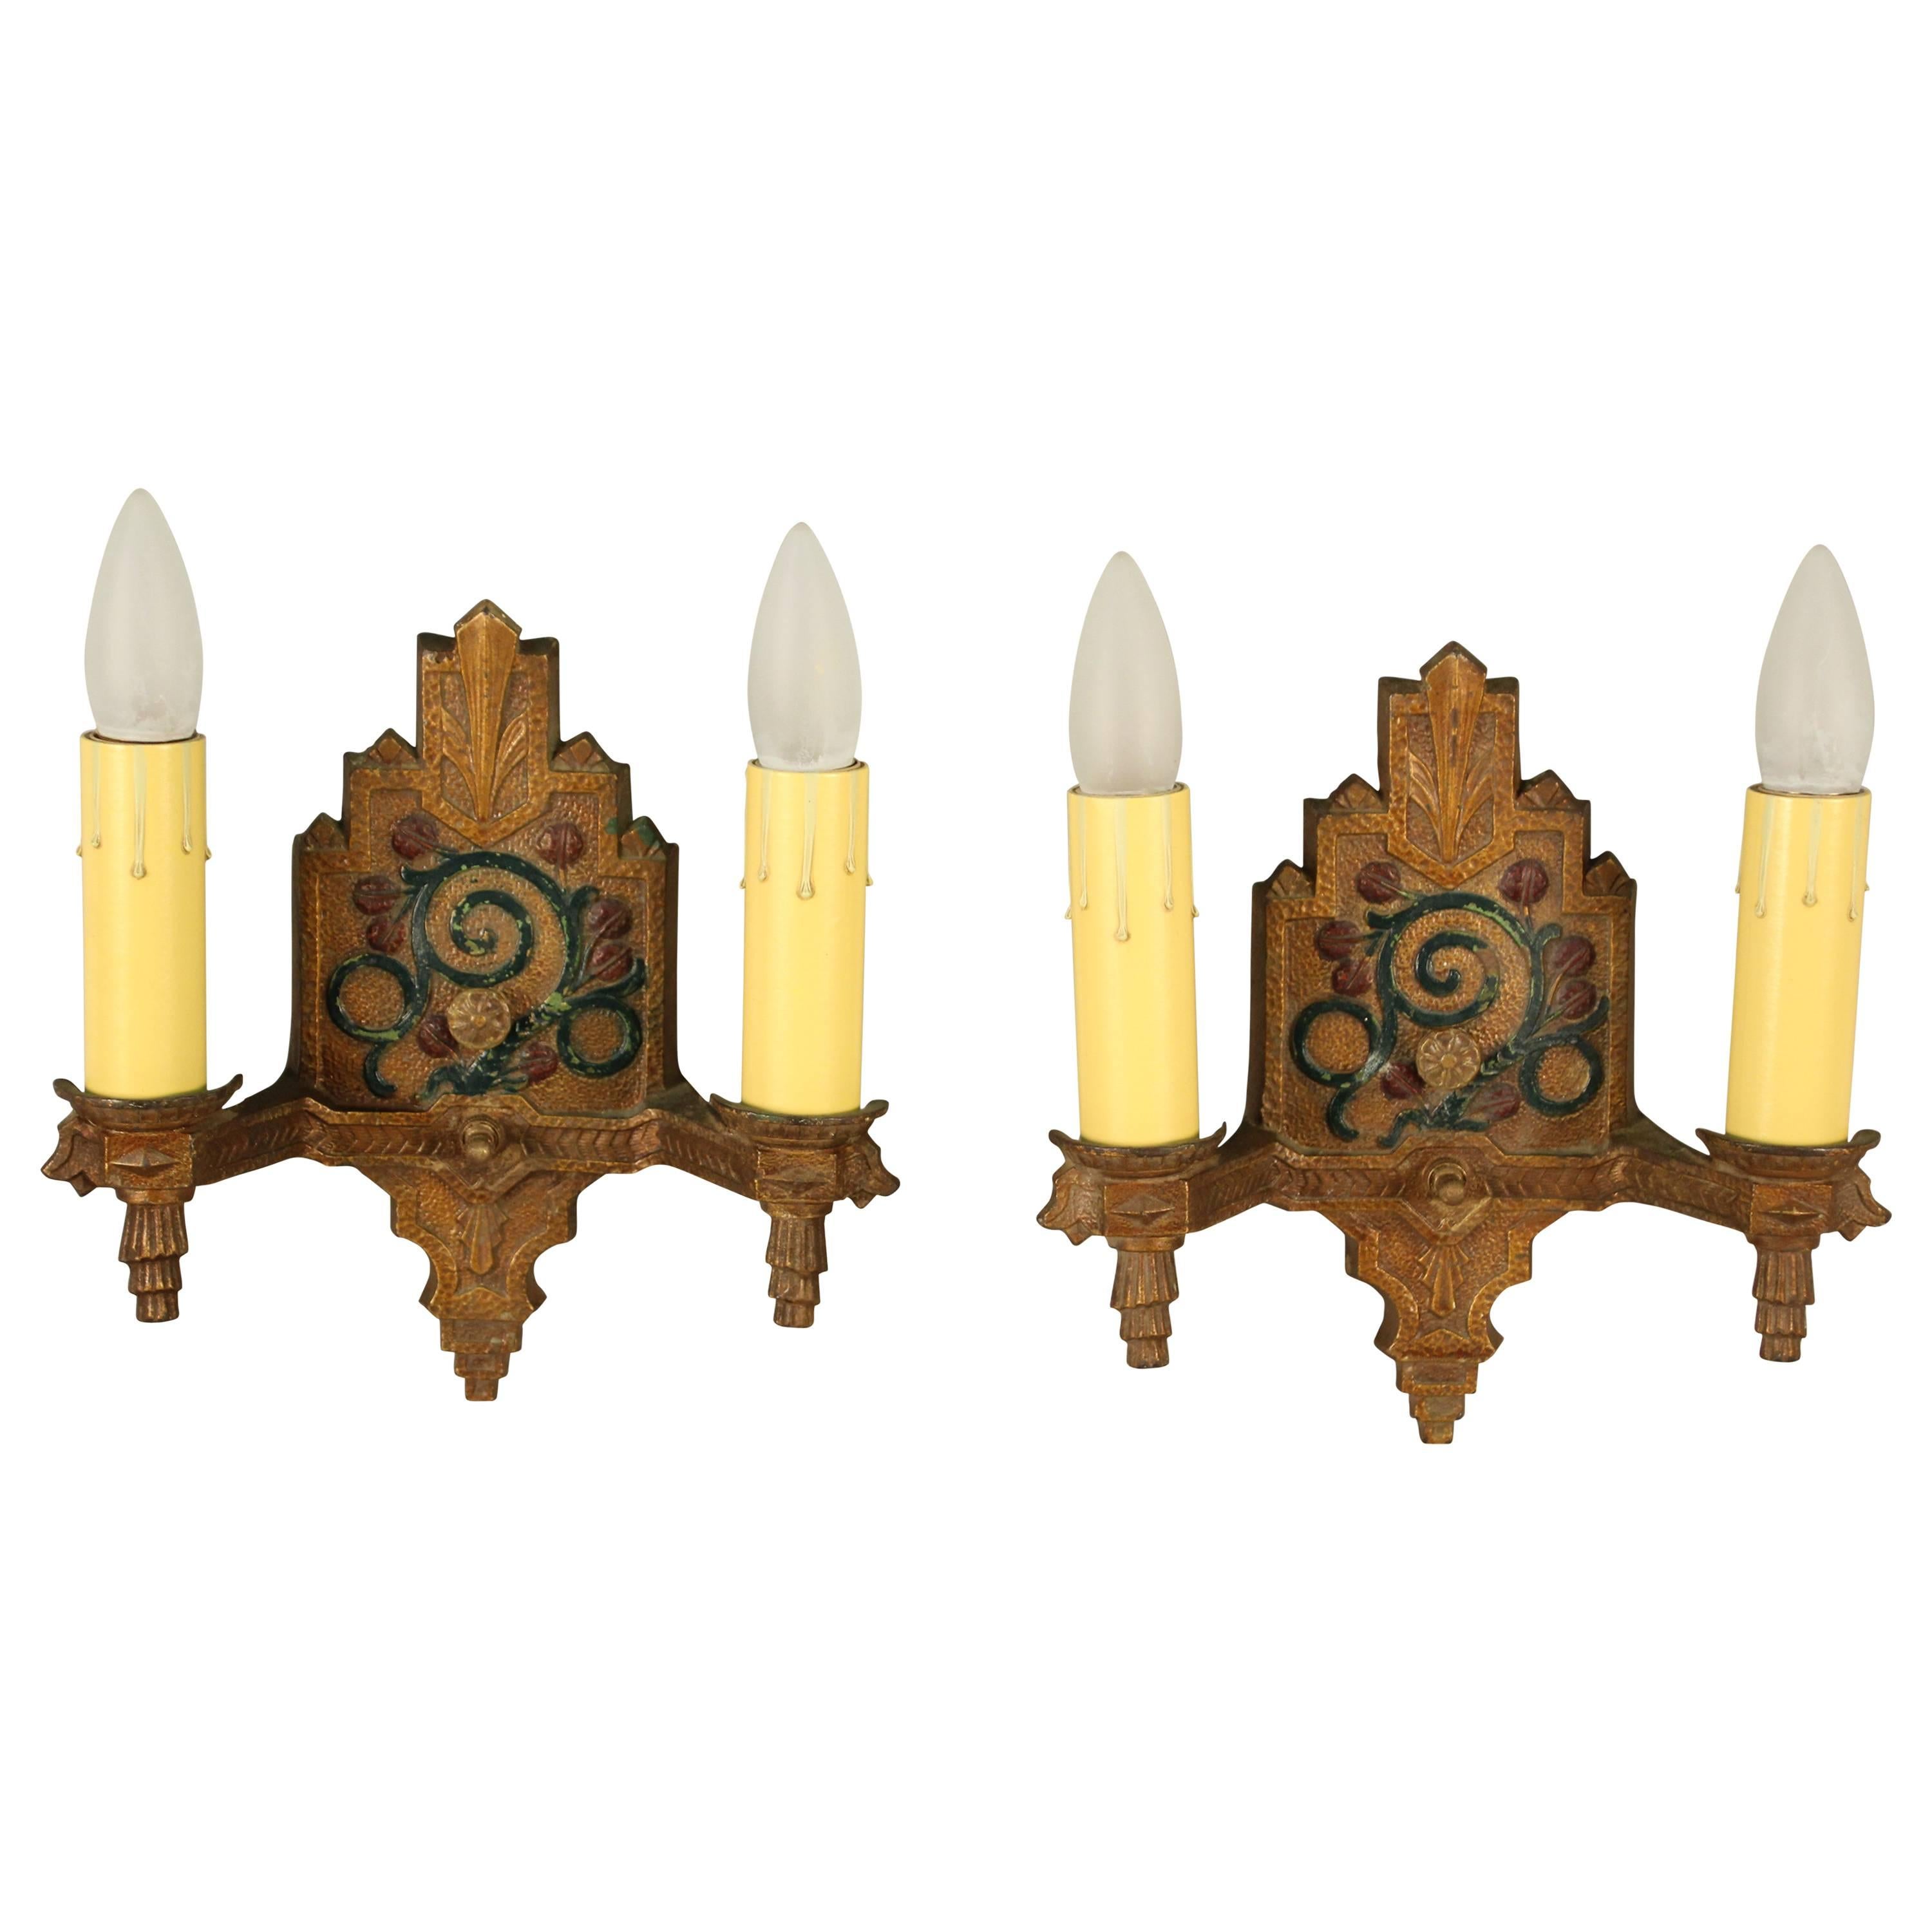 Pair of Double Polychrome Sconces with Floral Motif